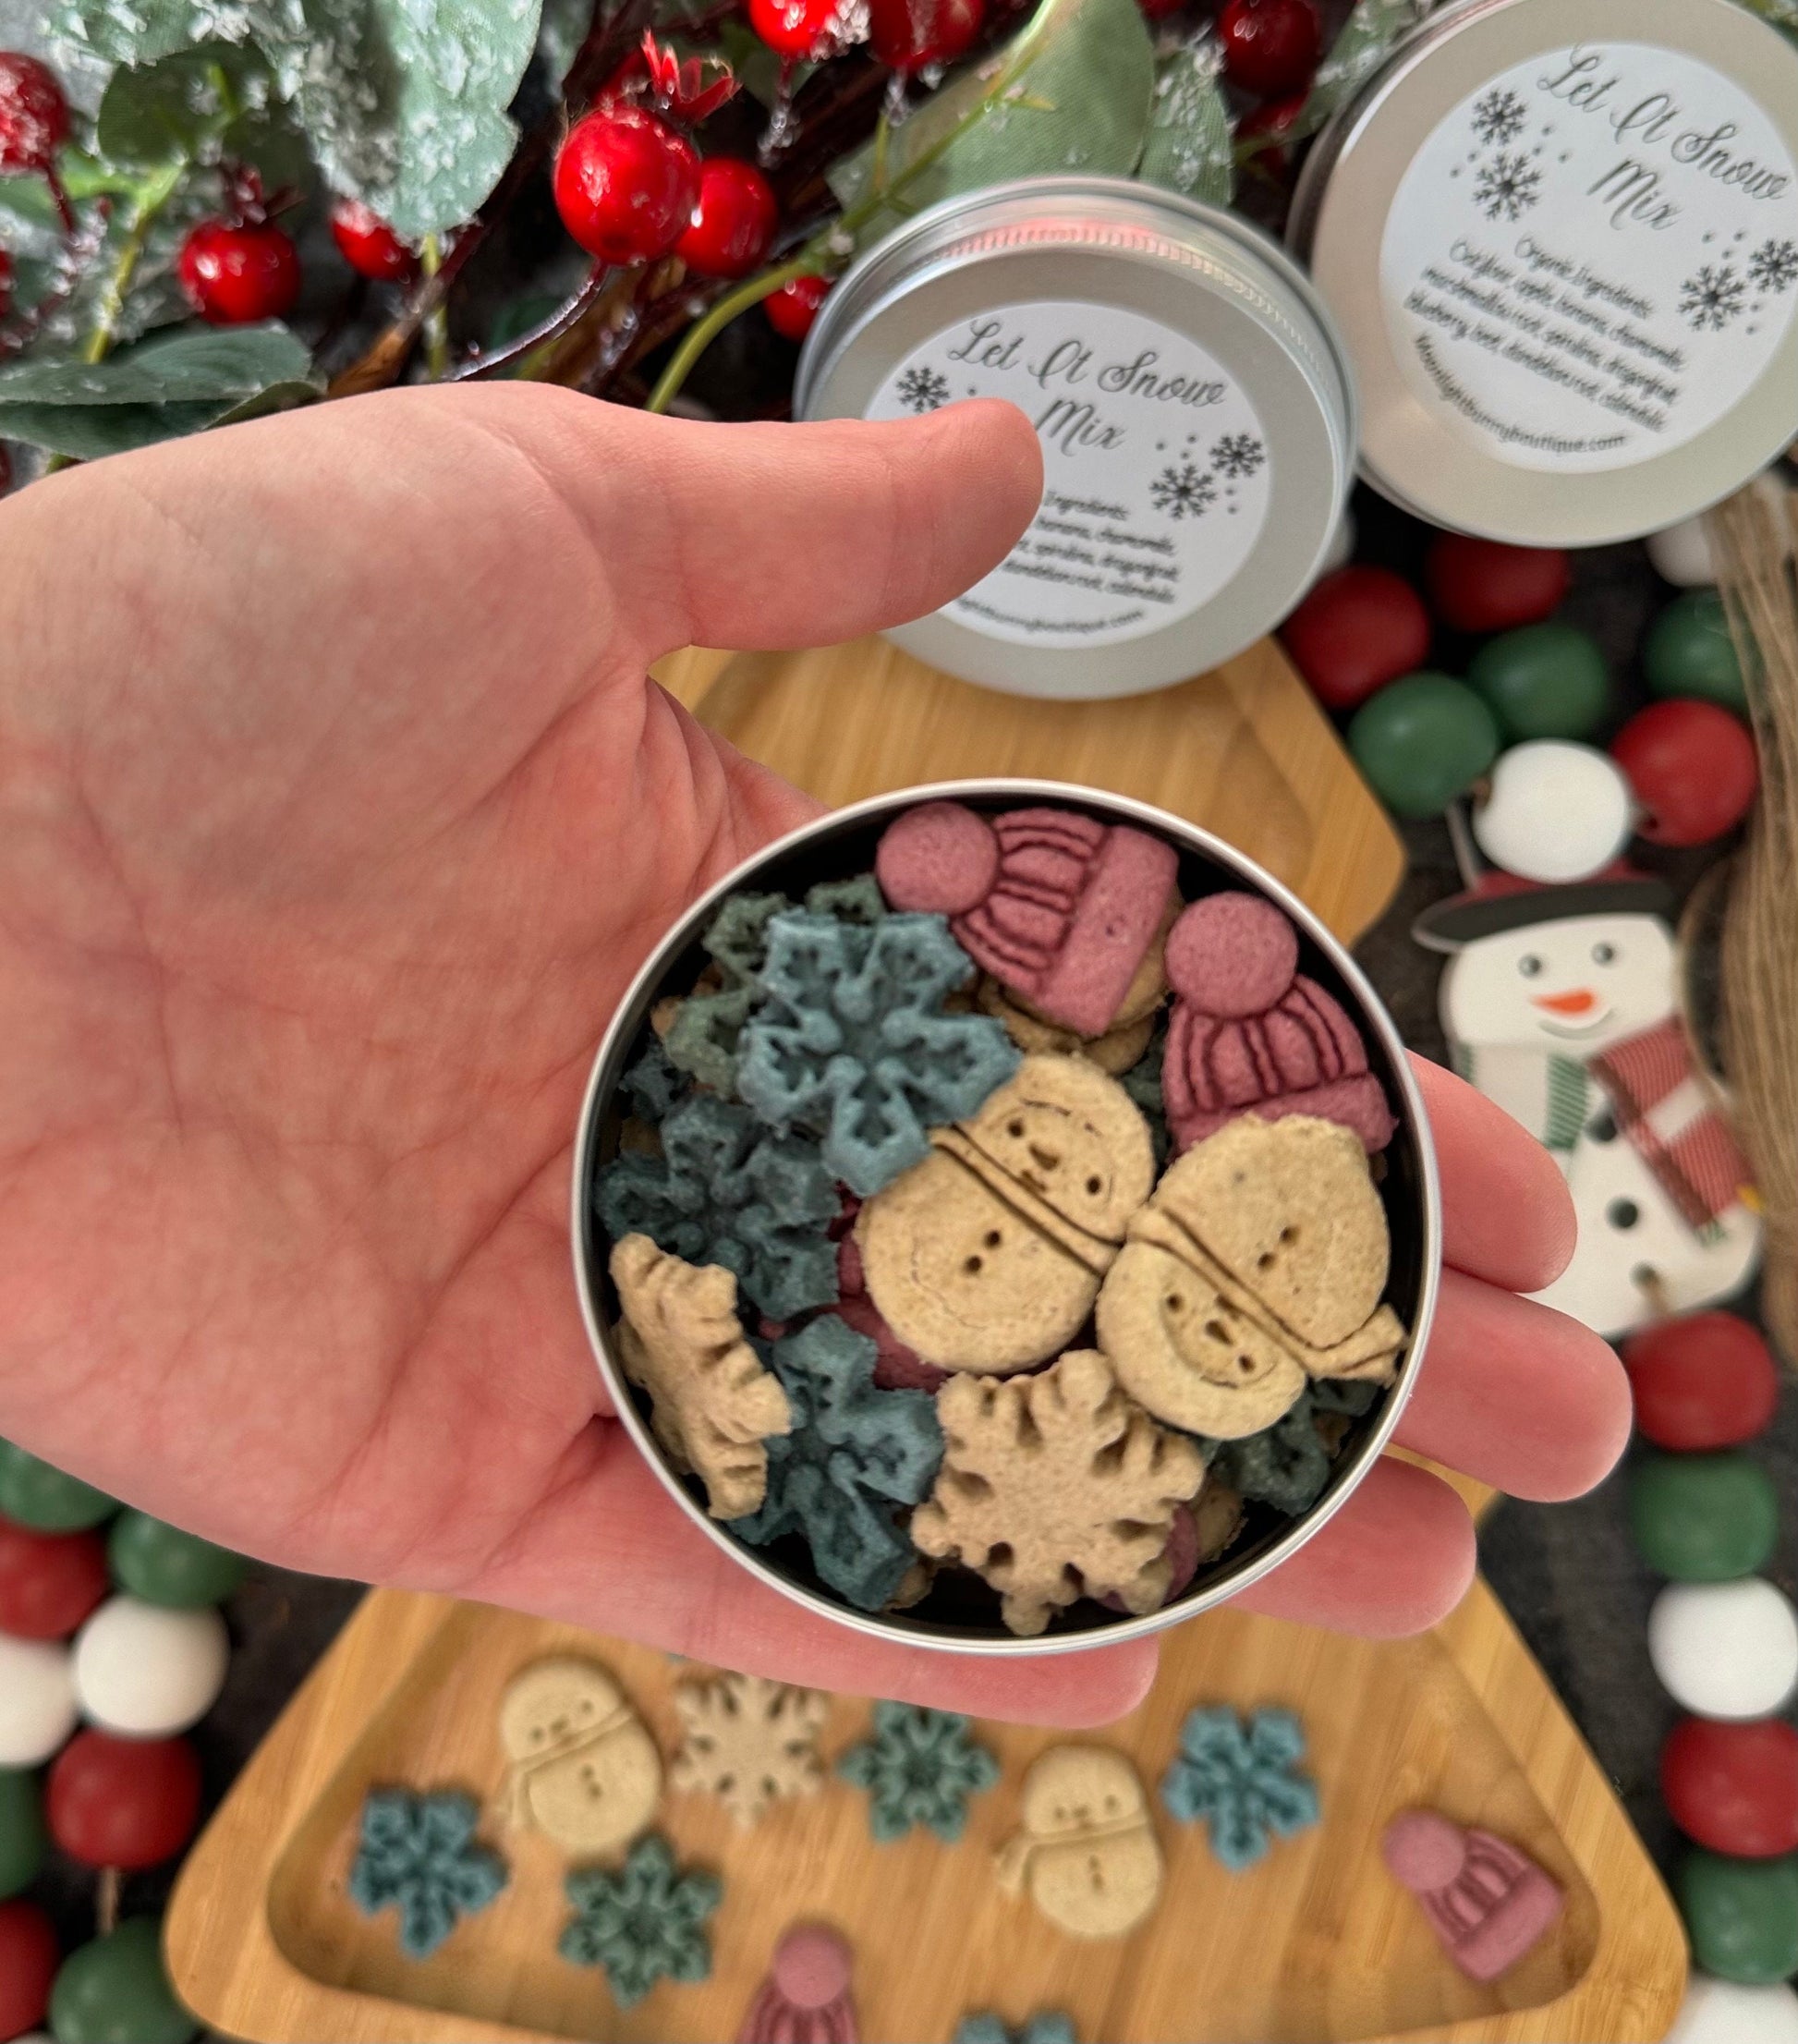 Let It Snow~Winter Inspired Bite Sized Treats for Rabbits, Guinea Pigs, Hamsters, Mice, and Small Pets, All Natural, Organic & Healthy